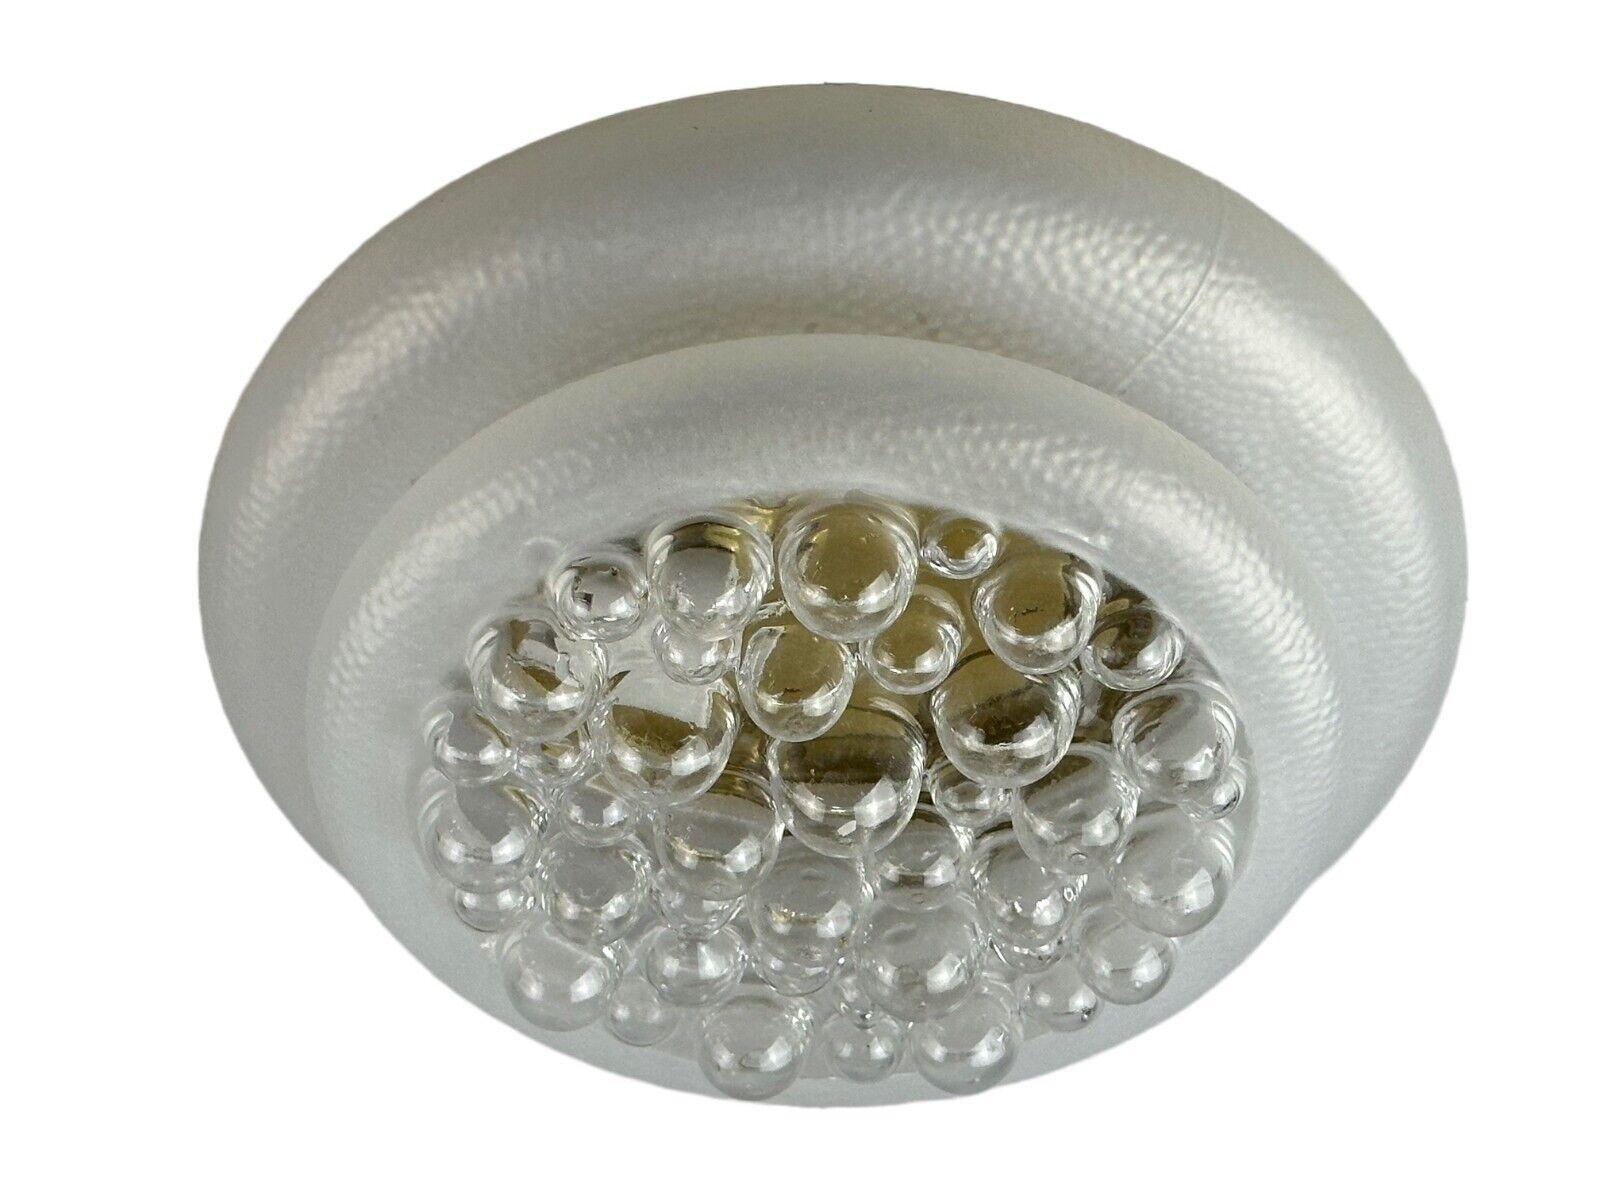 60s 70s Plafoniere ceiling lamp wall lamp bubble glass space age design

Object: ceiling lamp

Manufacturer:

Condition: good - vintage

Age: around 1960-1970

Dimensions:

Diameter = 27cm
Height = 12.5cm

Other notes:

E27 socket

The pictures